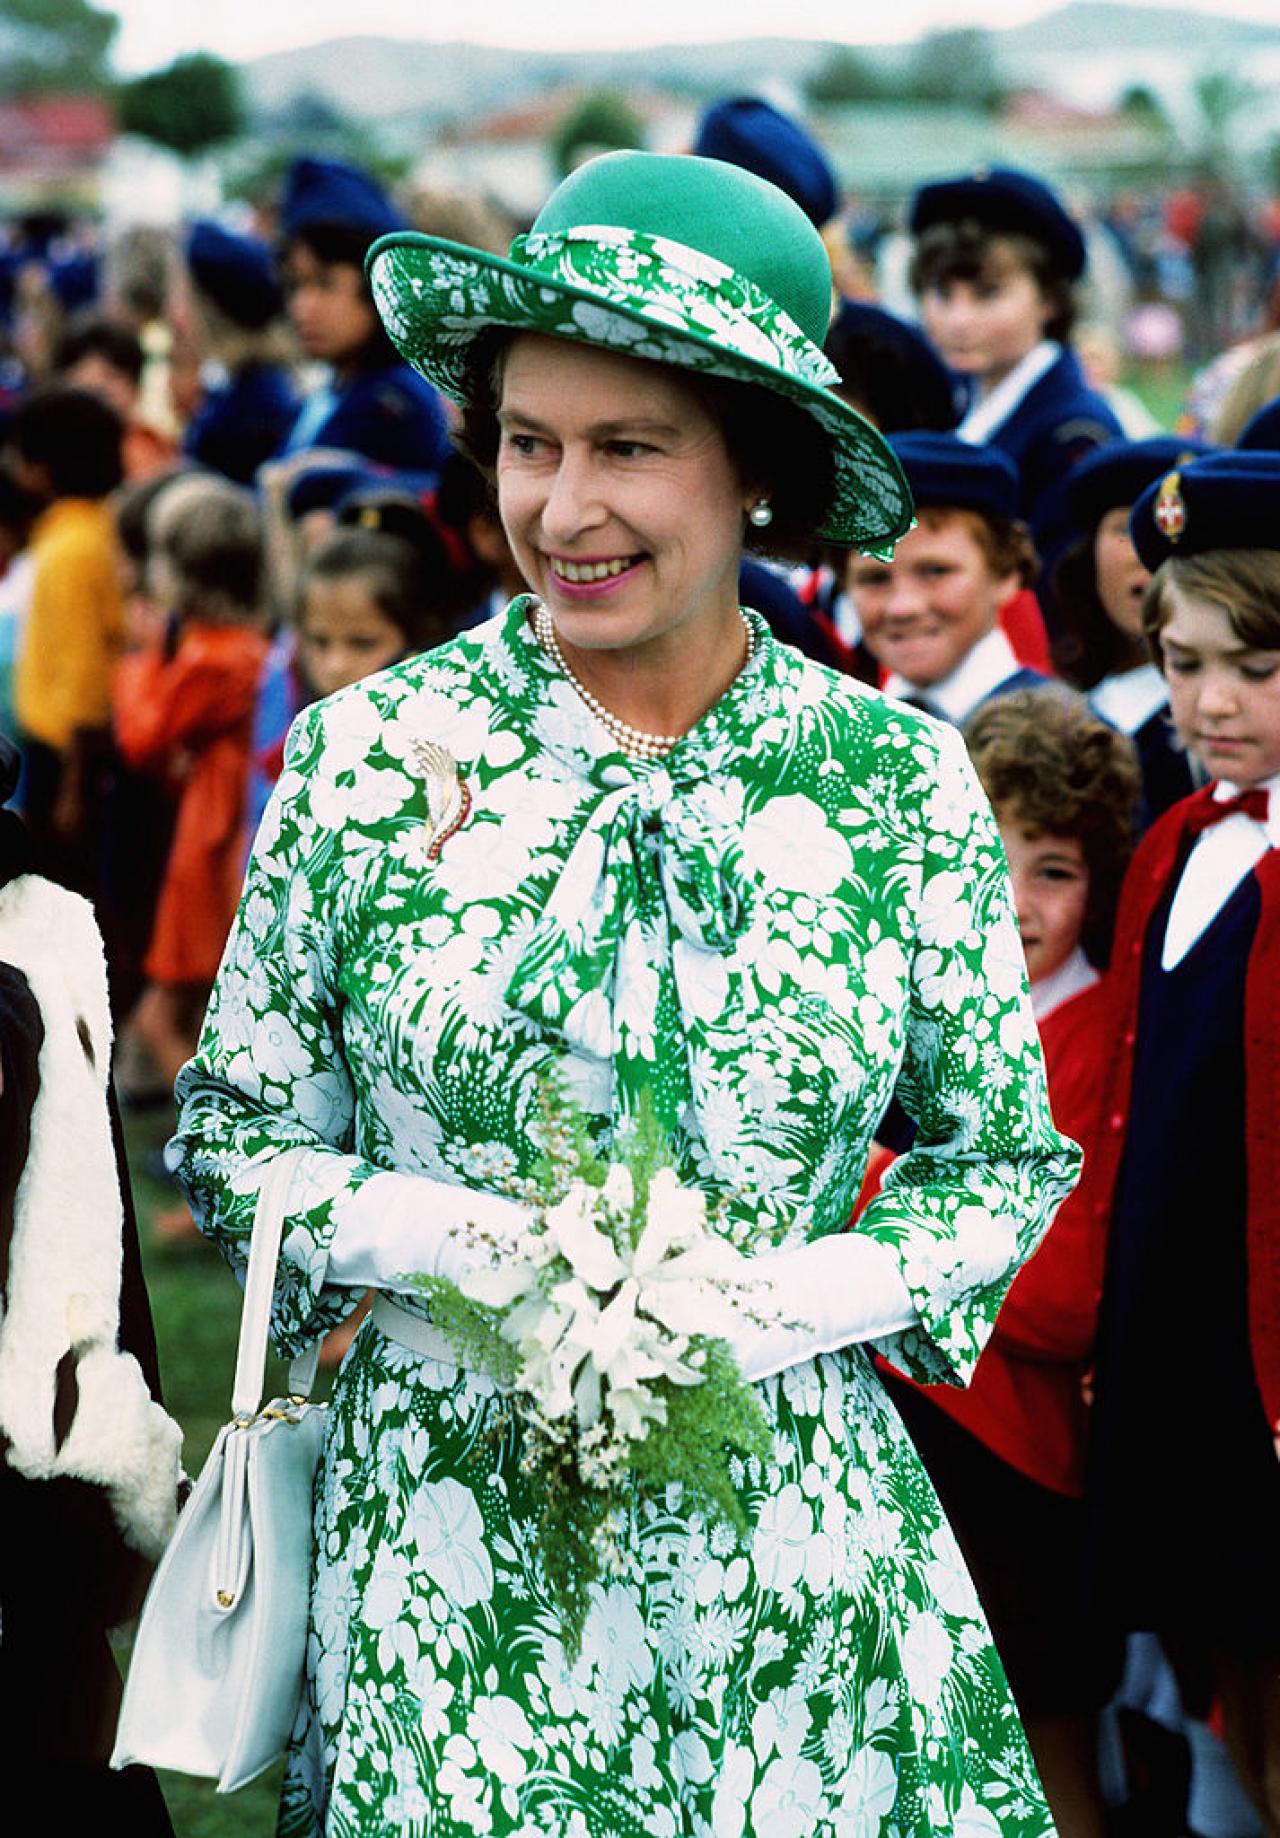 NEW ZEALAND - MARCH: Queen Elizabeth ll smiles during her visit to New Zealand part of her Silver Jubilee Year Tour  in March of 1977. (Photo by Anwar Hussein/Getty Images)